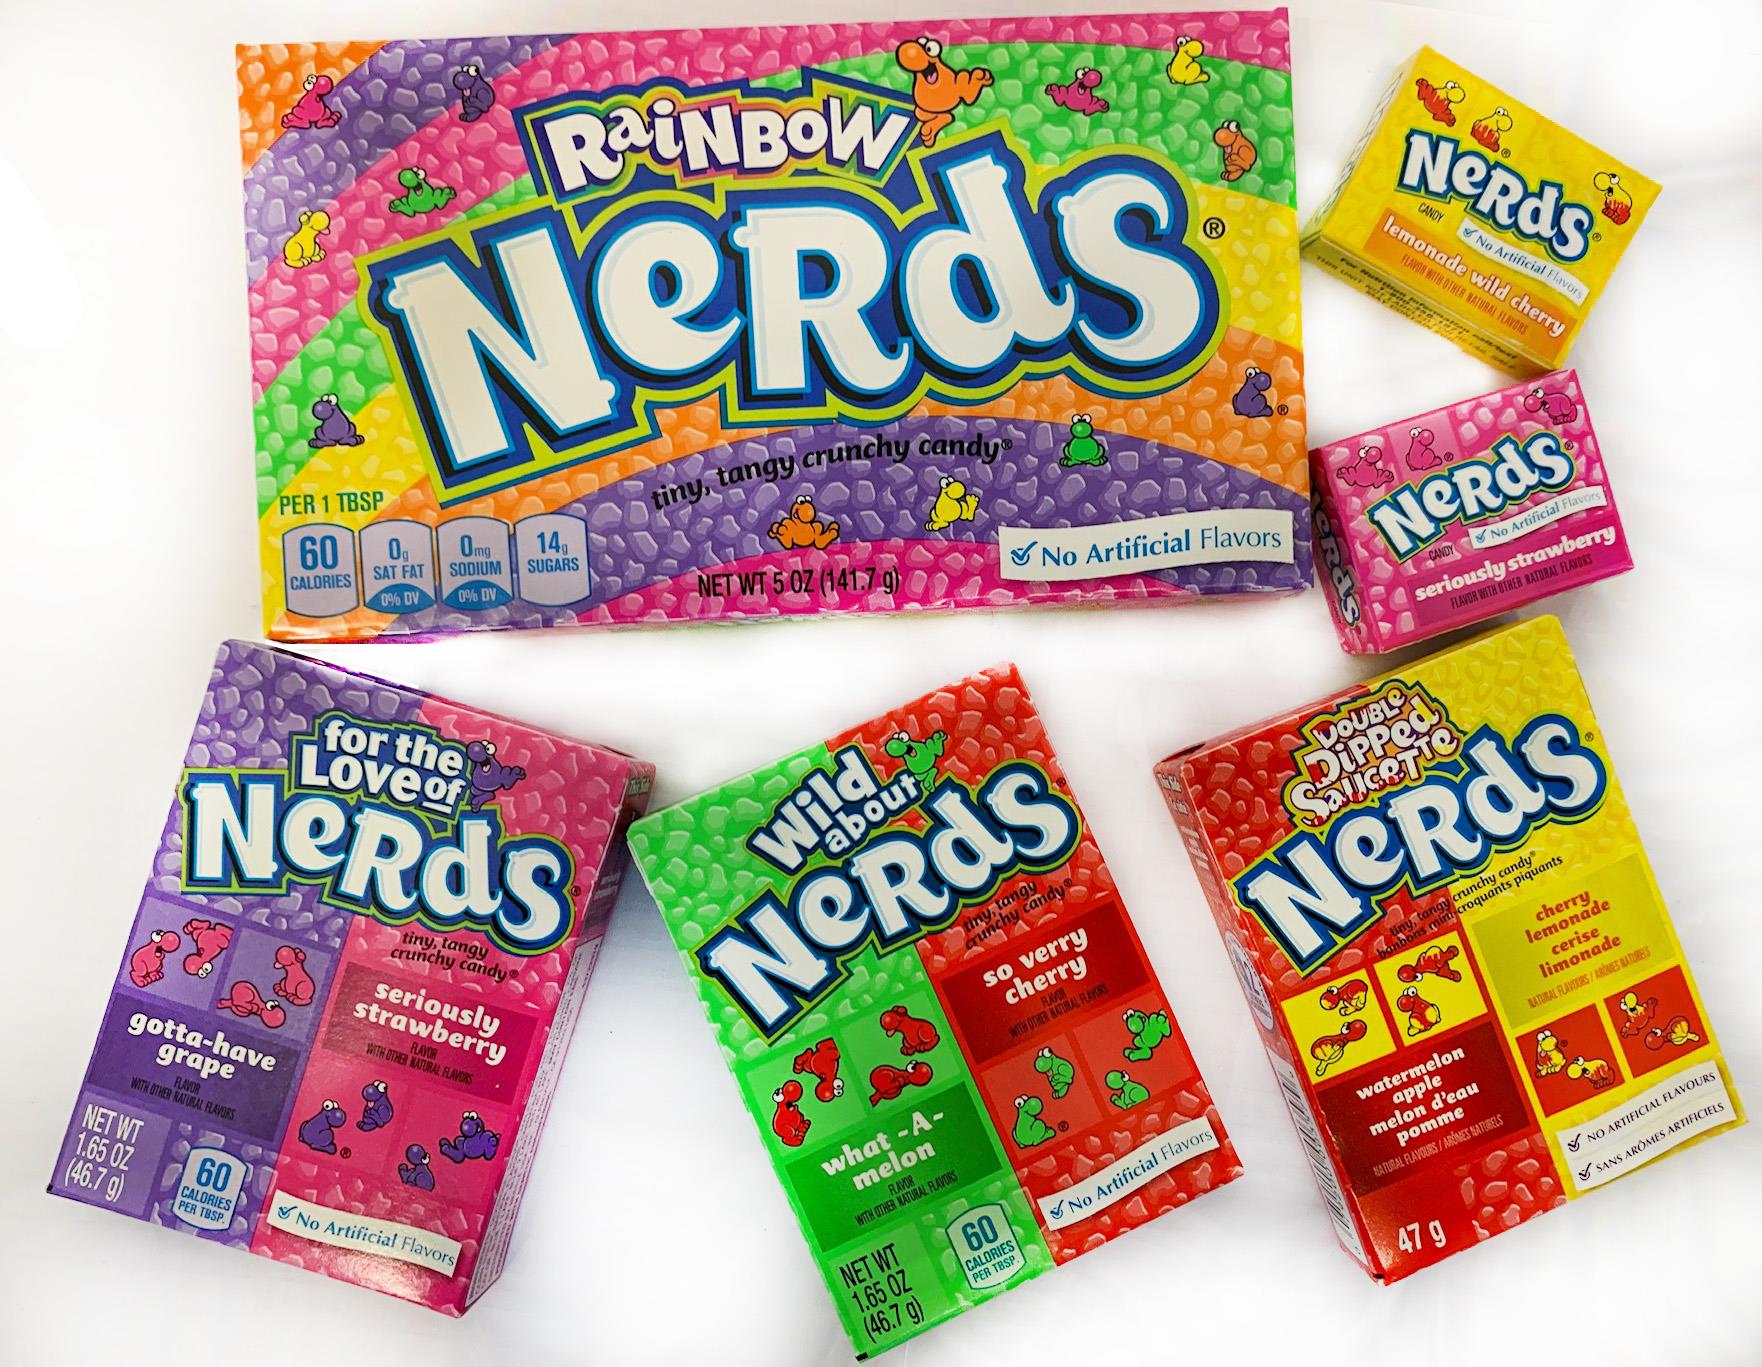 Picaboxx-Wonka-Nerds-American-Sweets-Selection-Gift-Box-100292-2.jpg